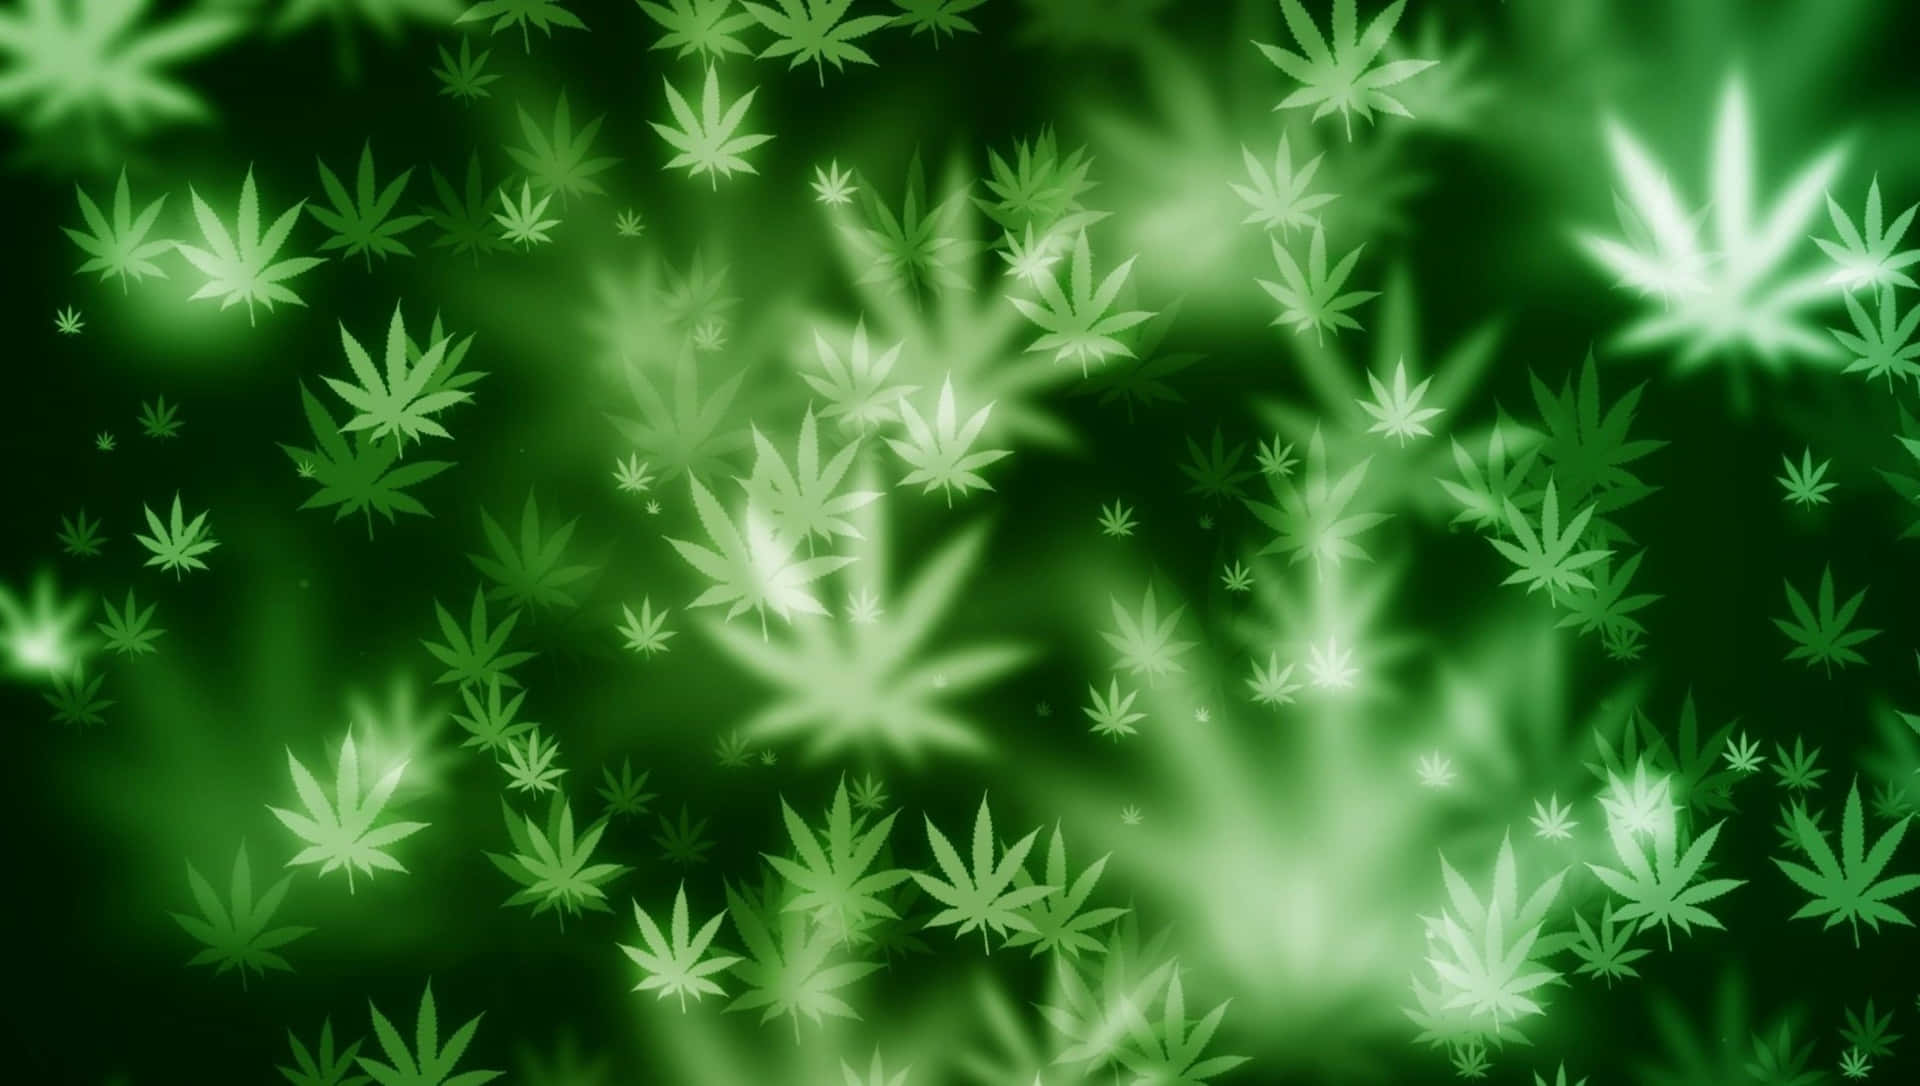 Free Weed Wallpaper Downloads, [200+] Weed Wallpapers for FREE | Wallpapers .com